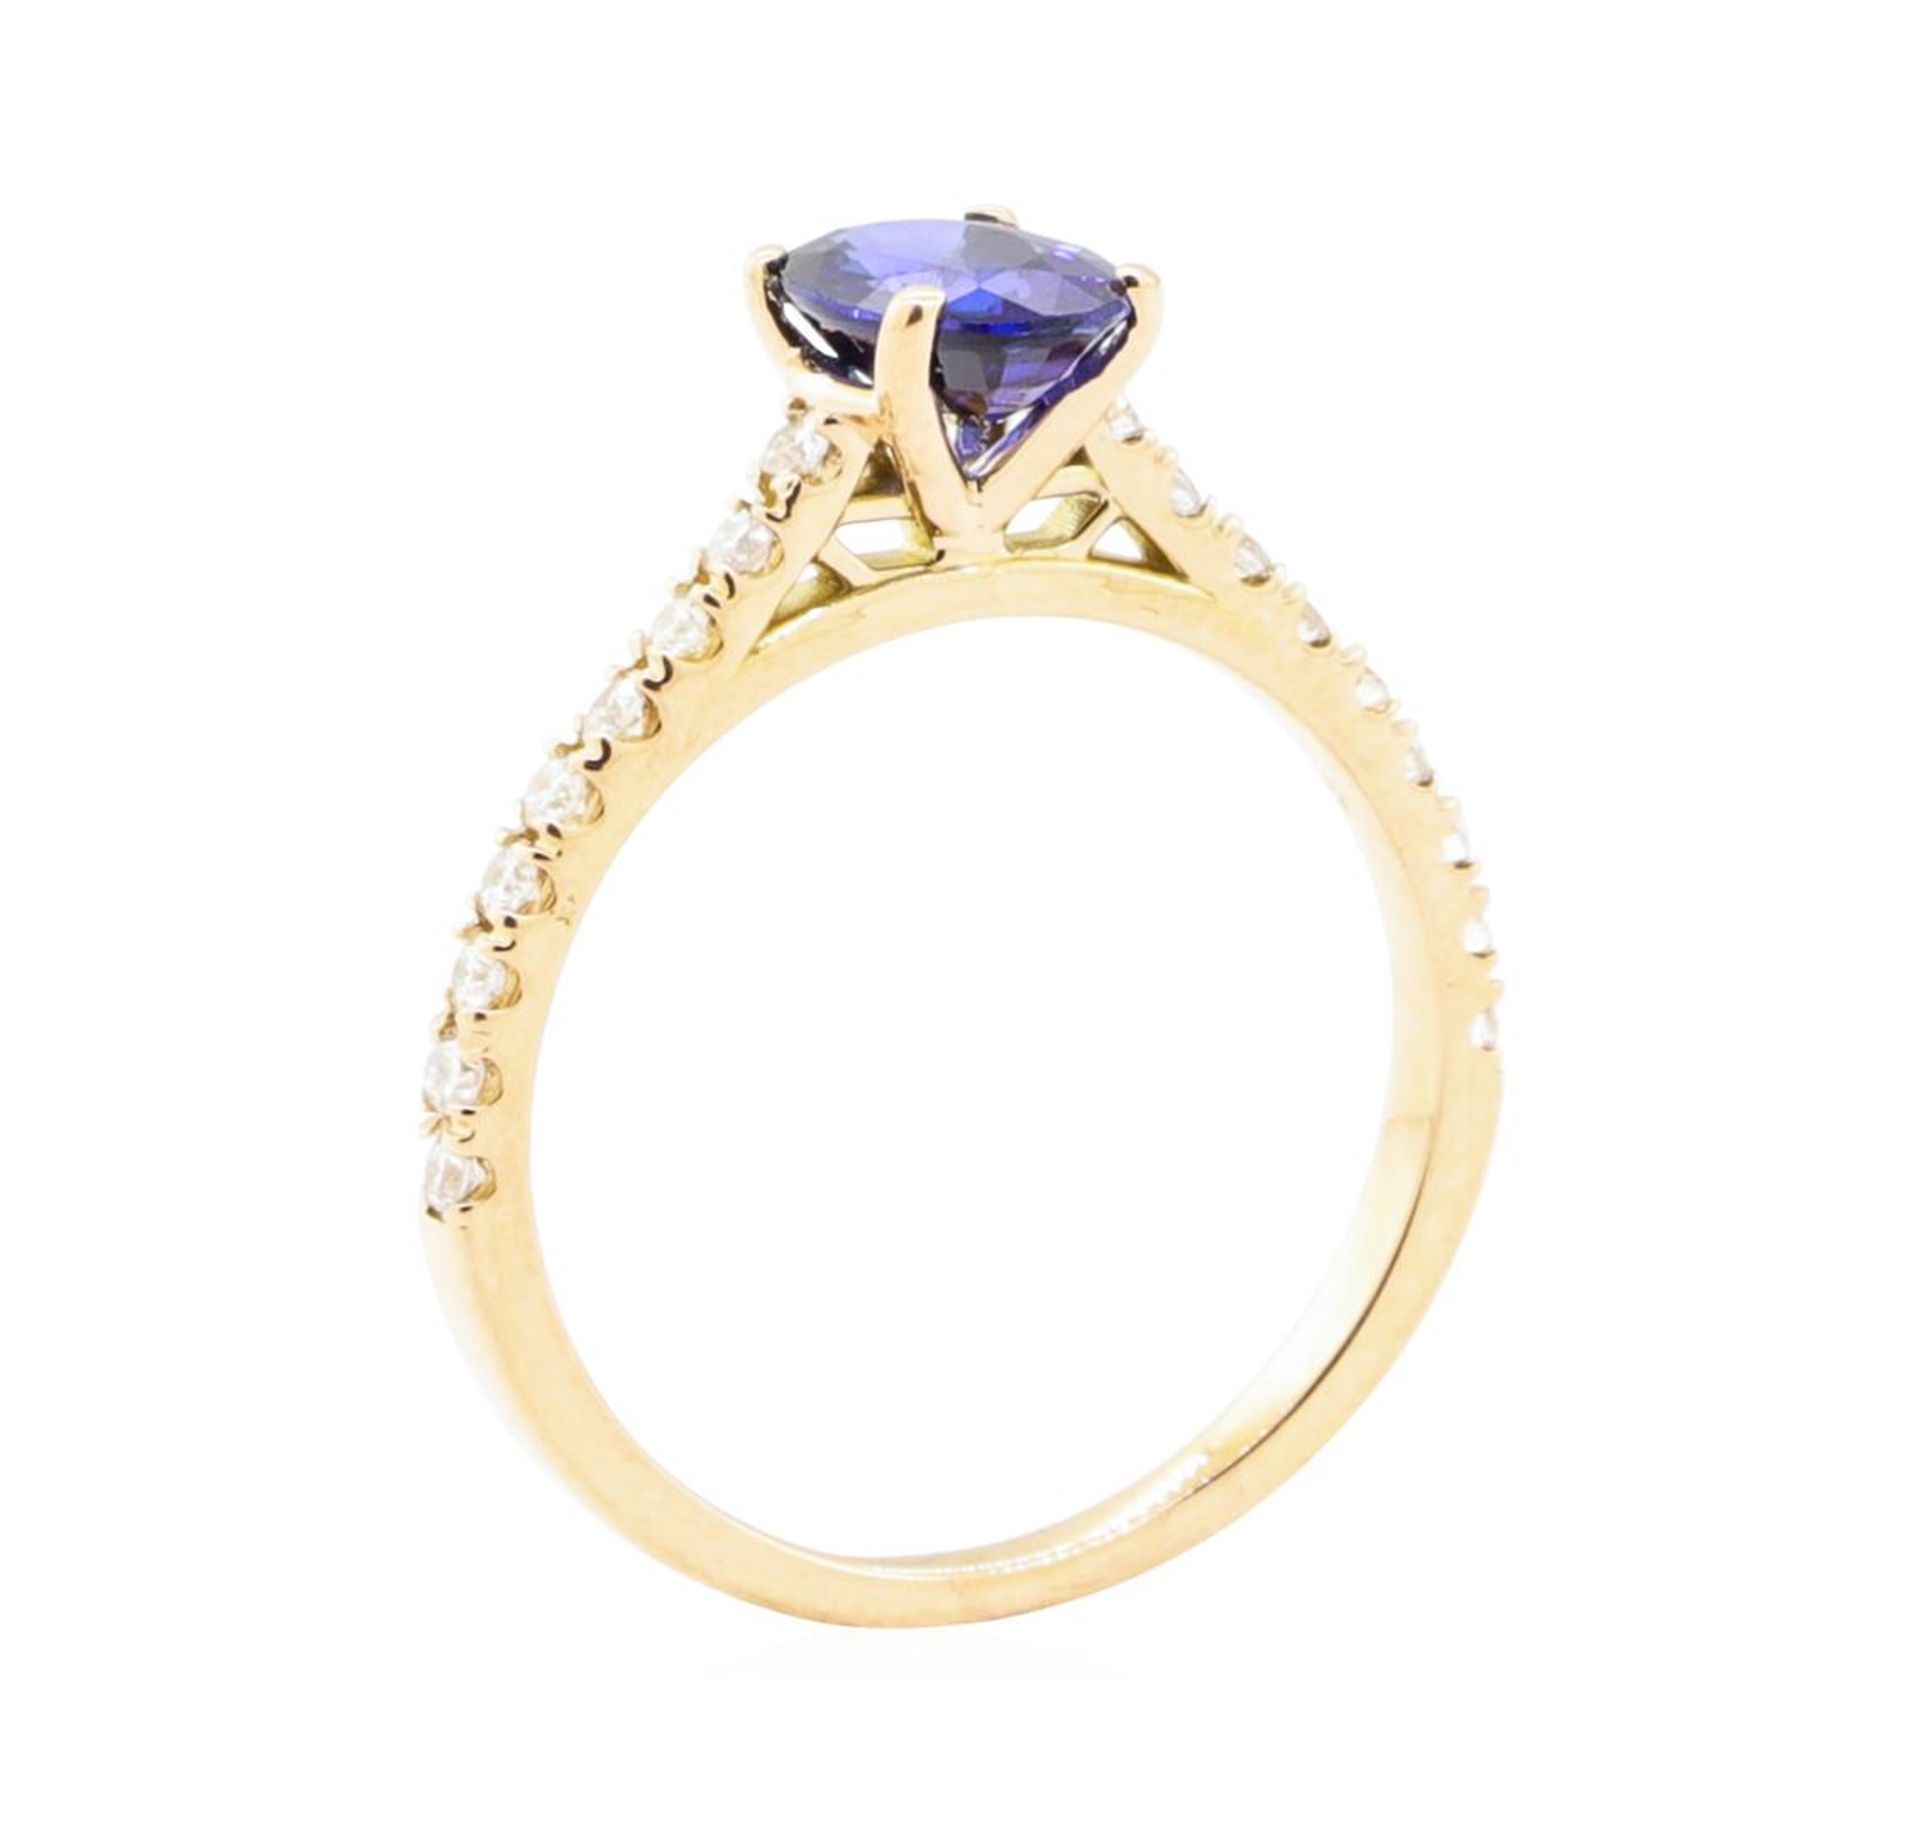 1.24ctw Sapphire and Diamond Ring - 14KT Rose Gold - Image 4 of 4